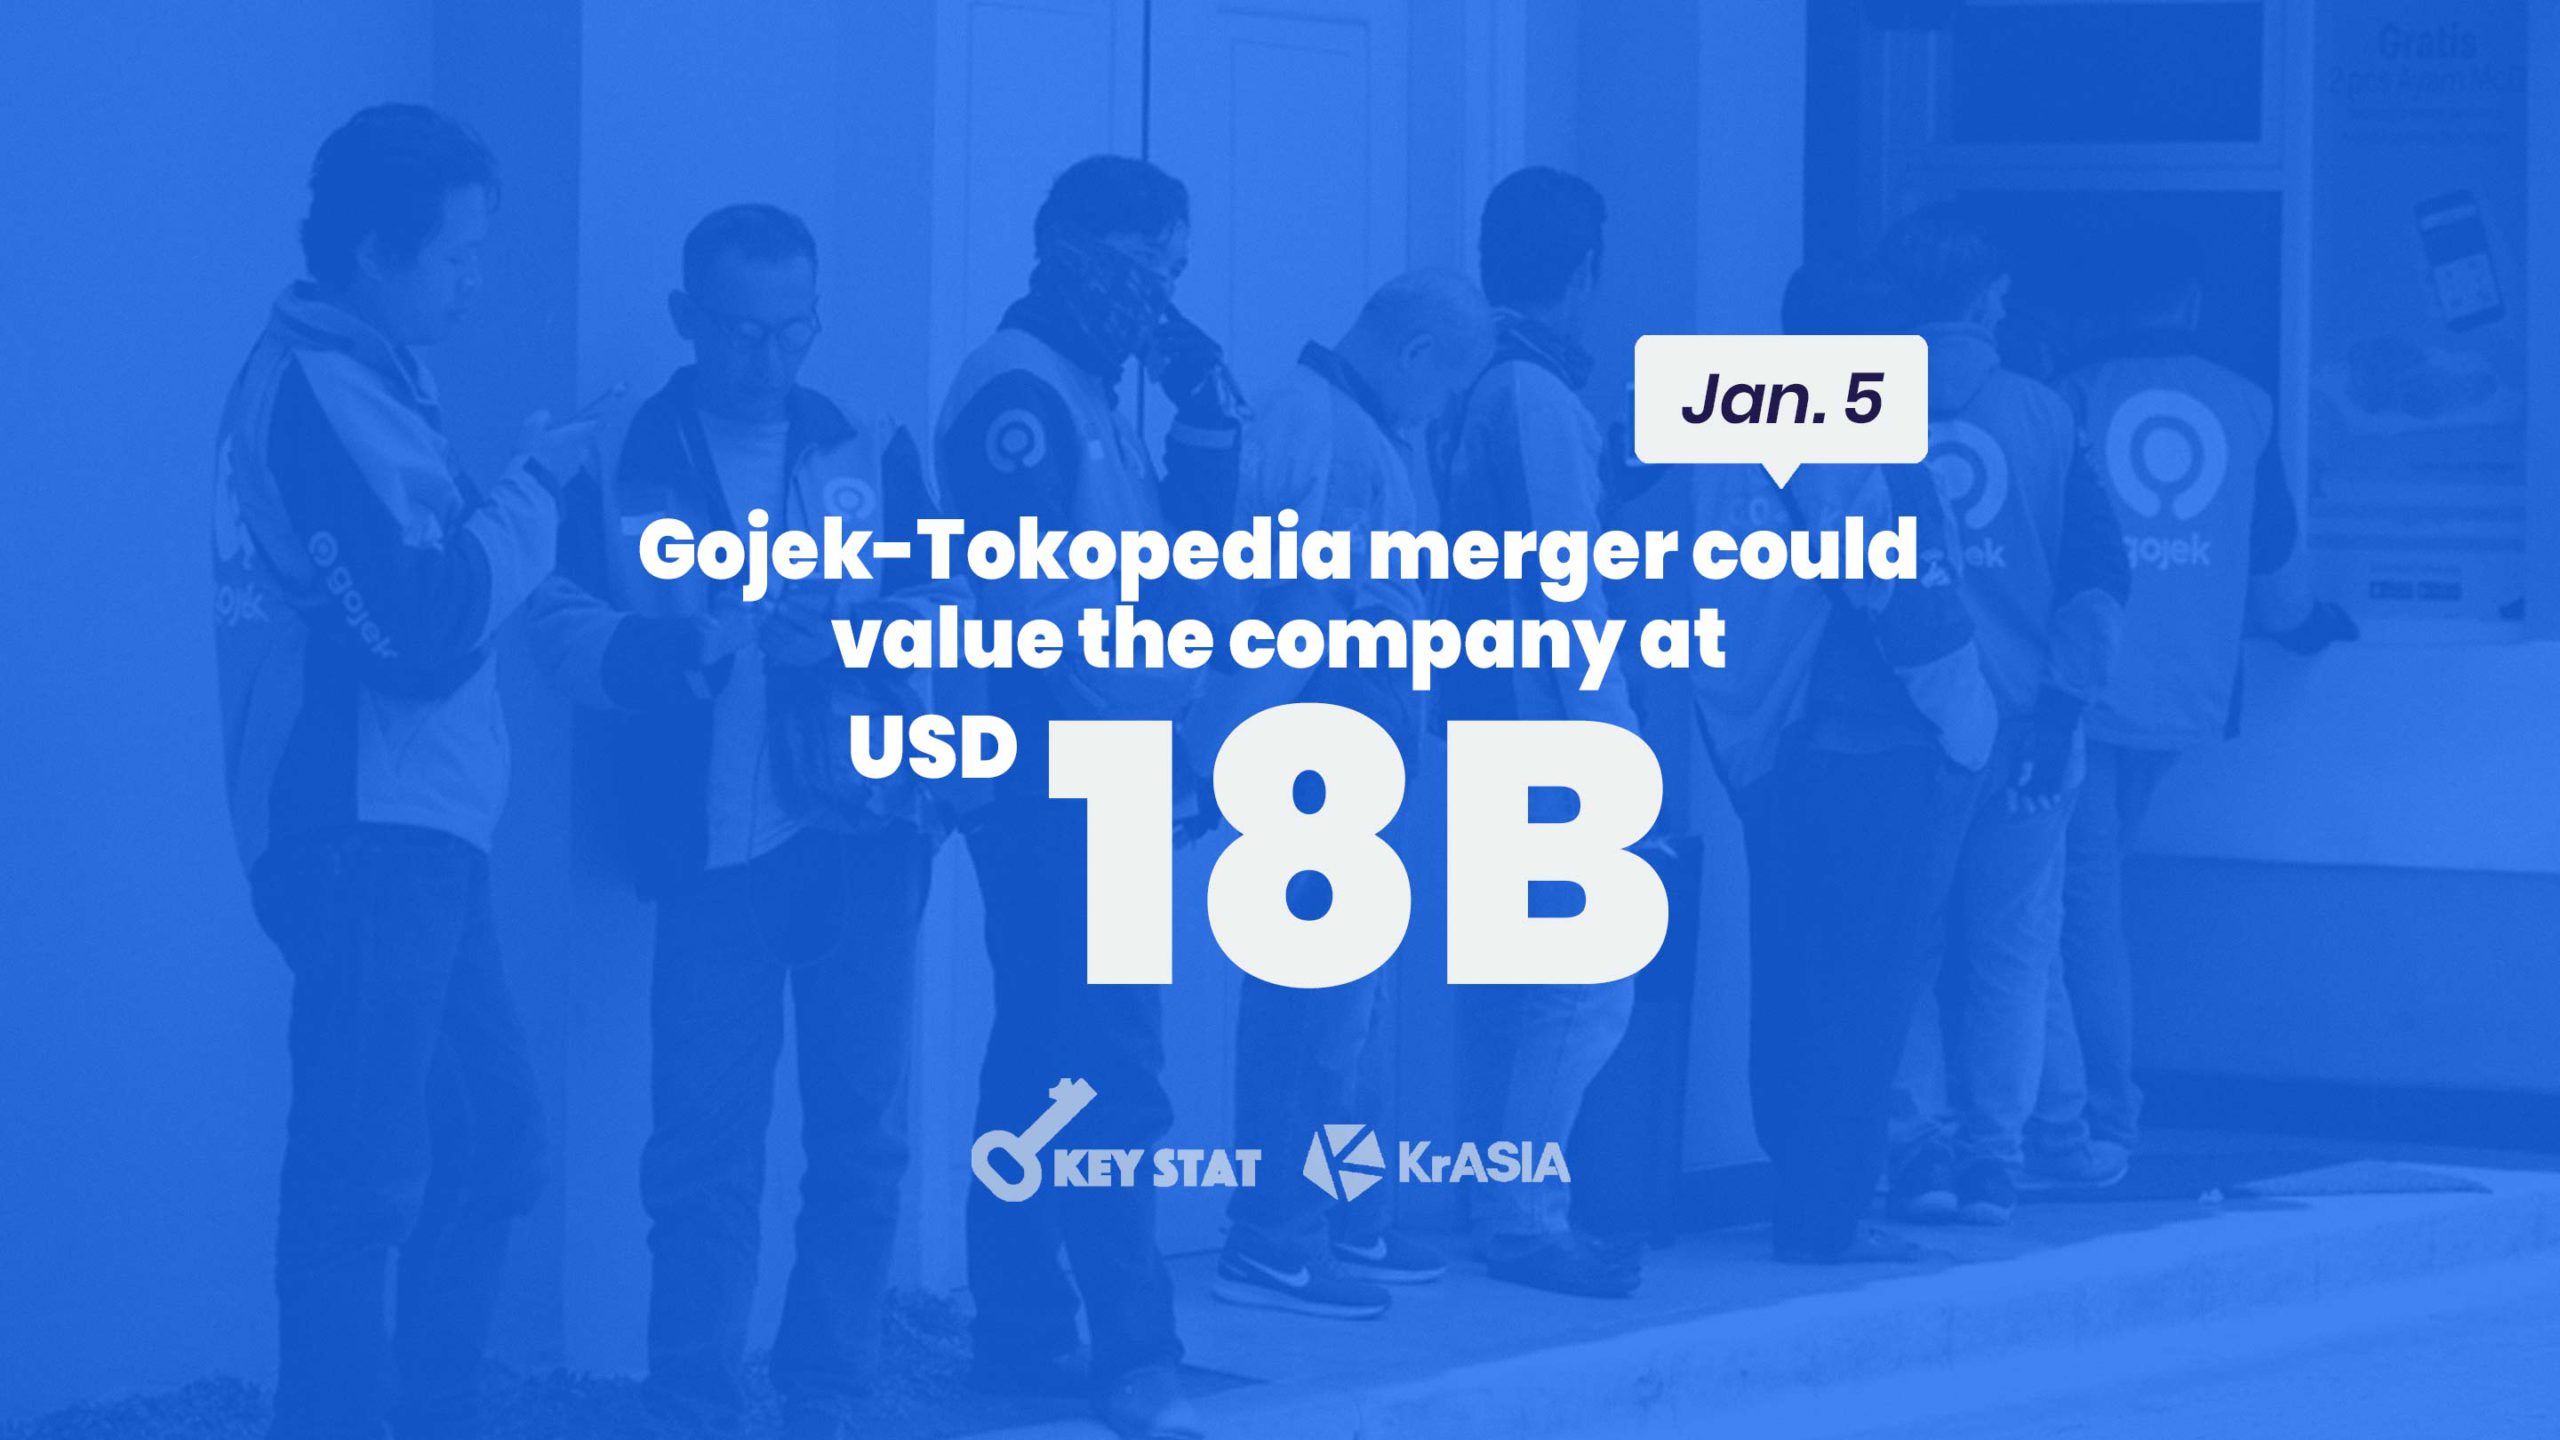 KEY STAT | Indonesia’s Gojek and Tokopedia could create national e-commerce champion